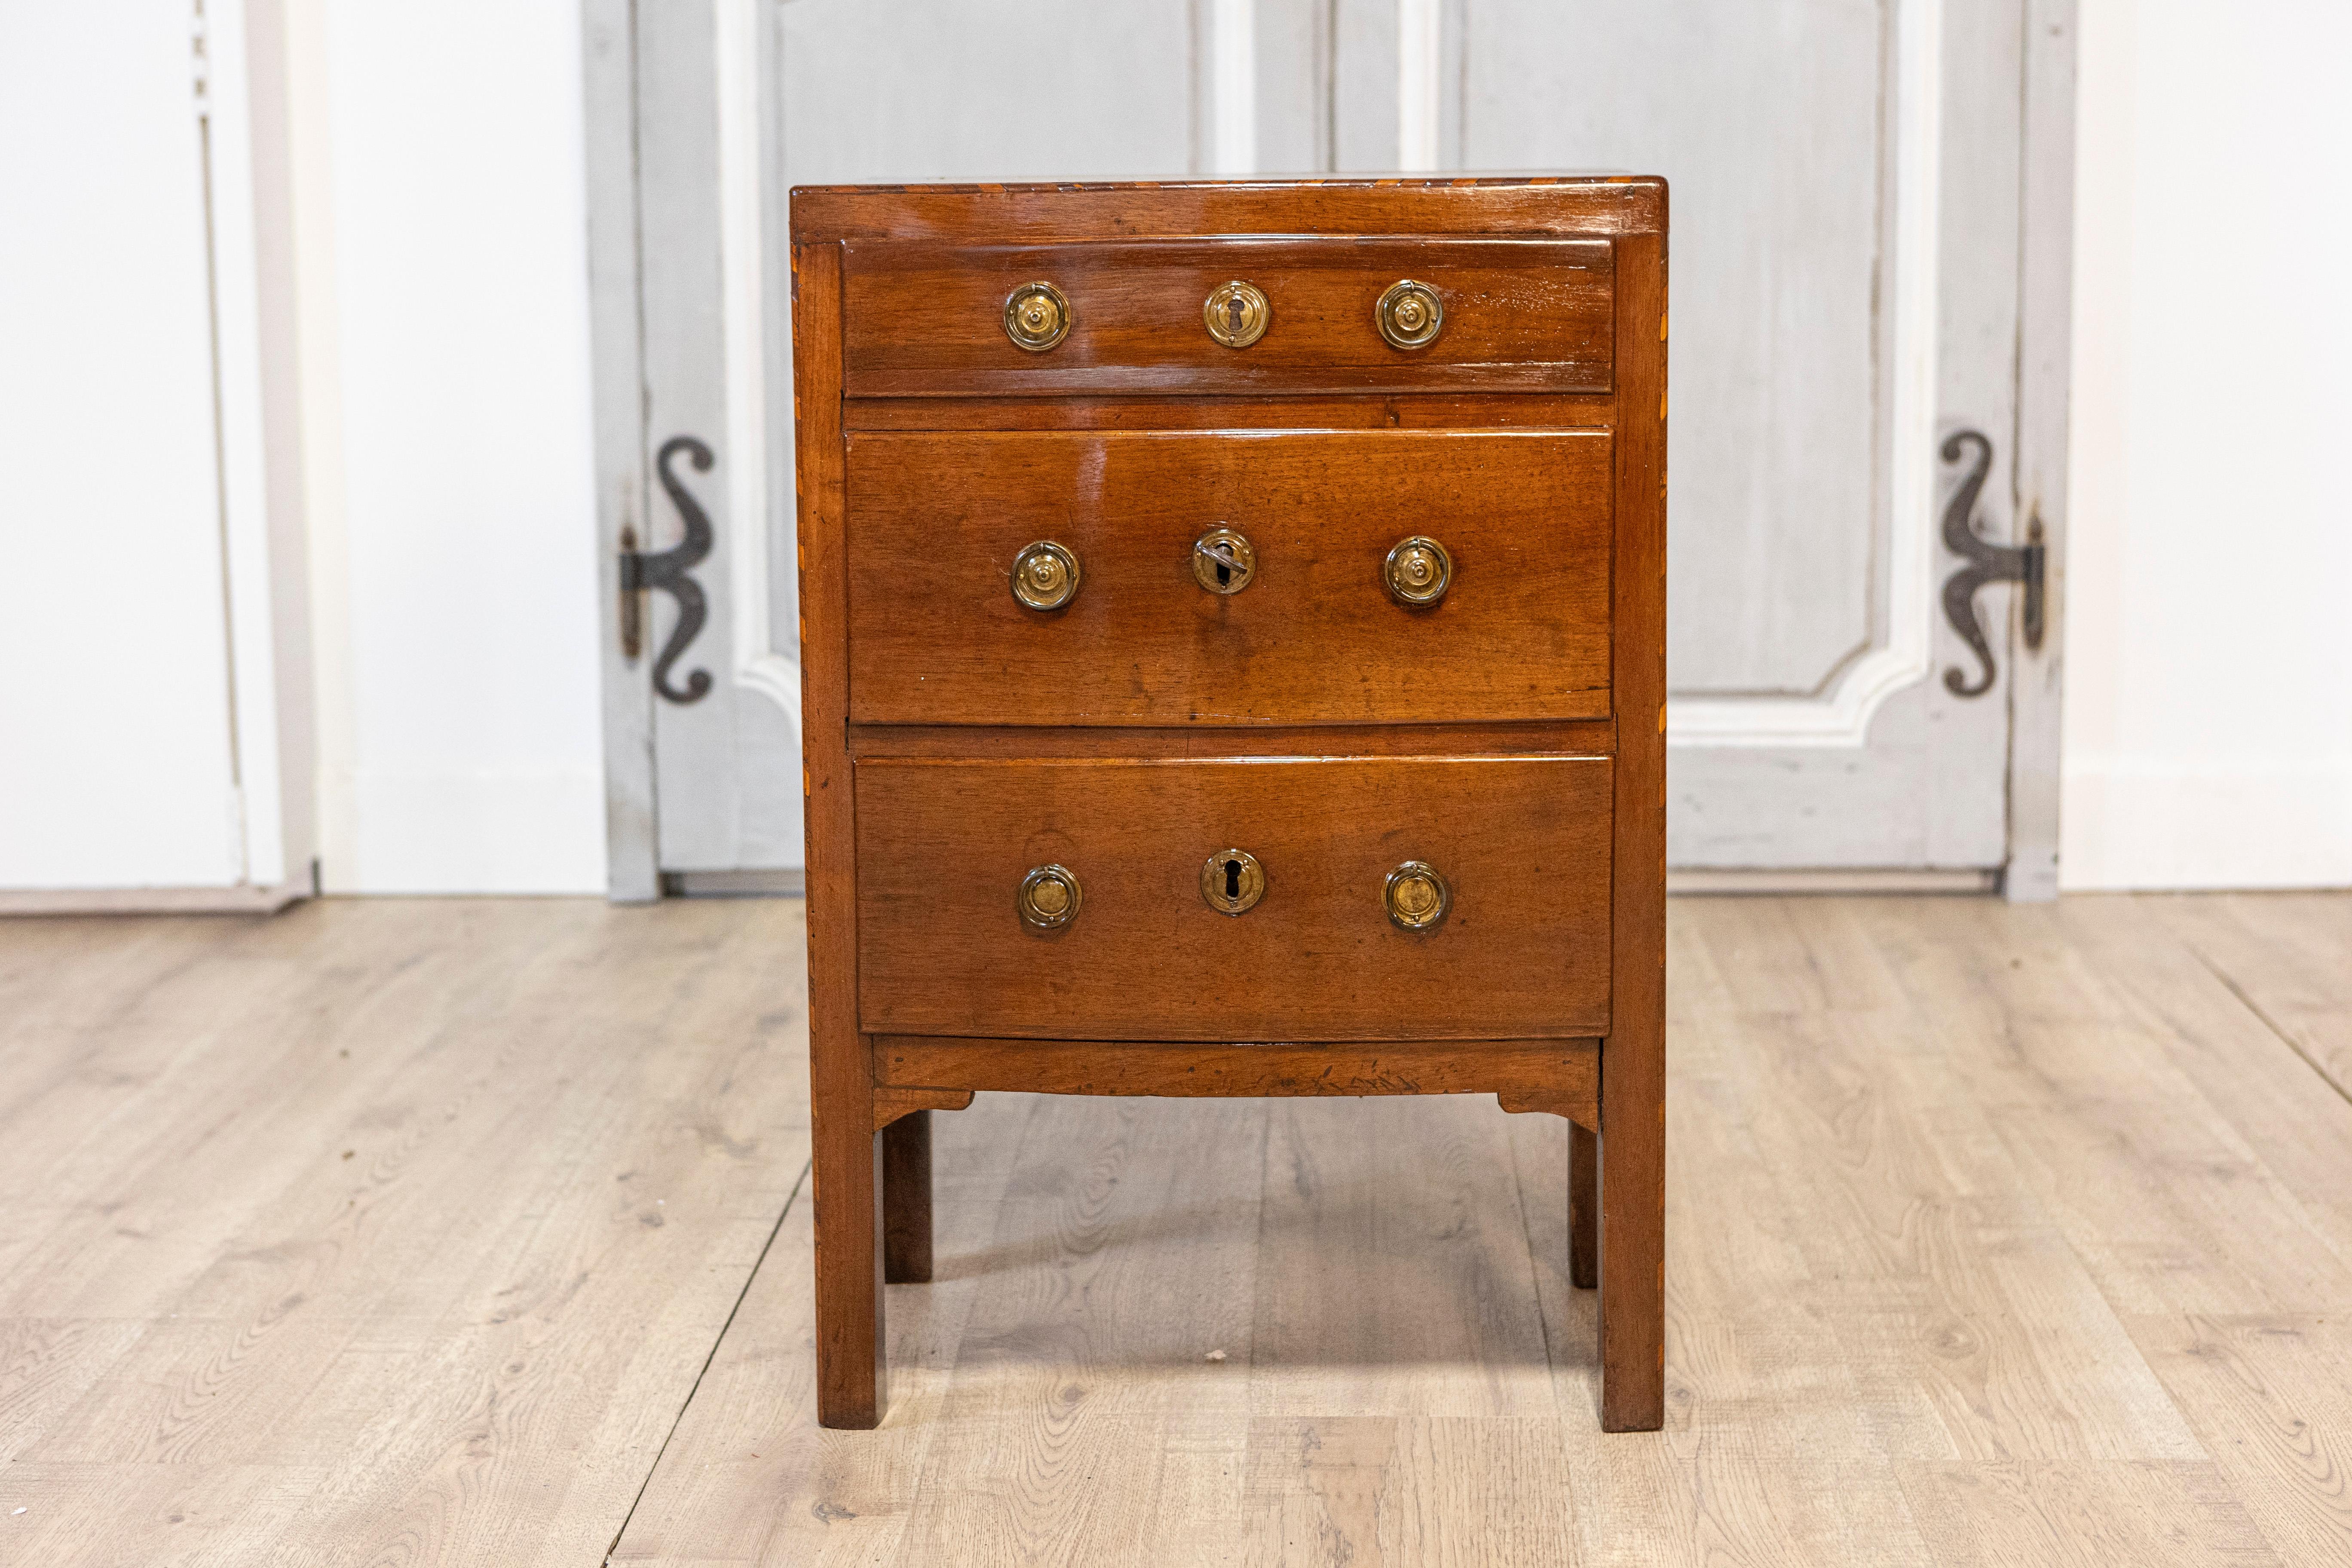 Inlay Italian Walnut Early 19th Century Three-Drawer Bedside Chest from Vicenza  For Sale